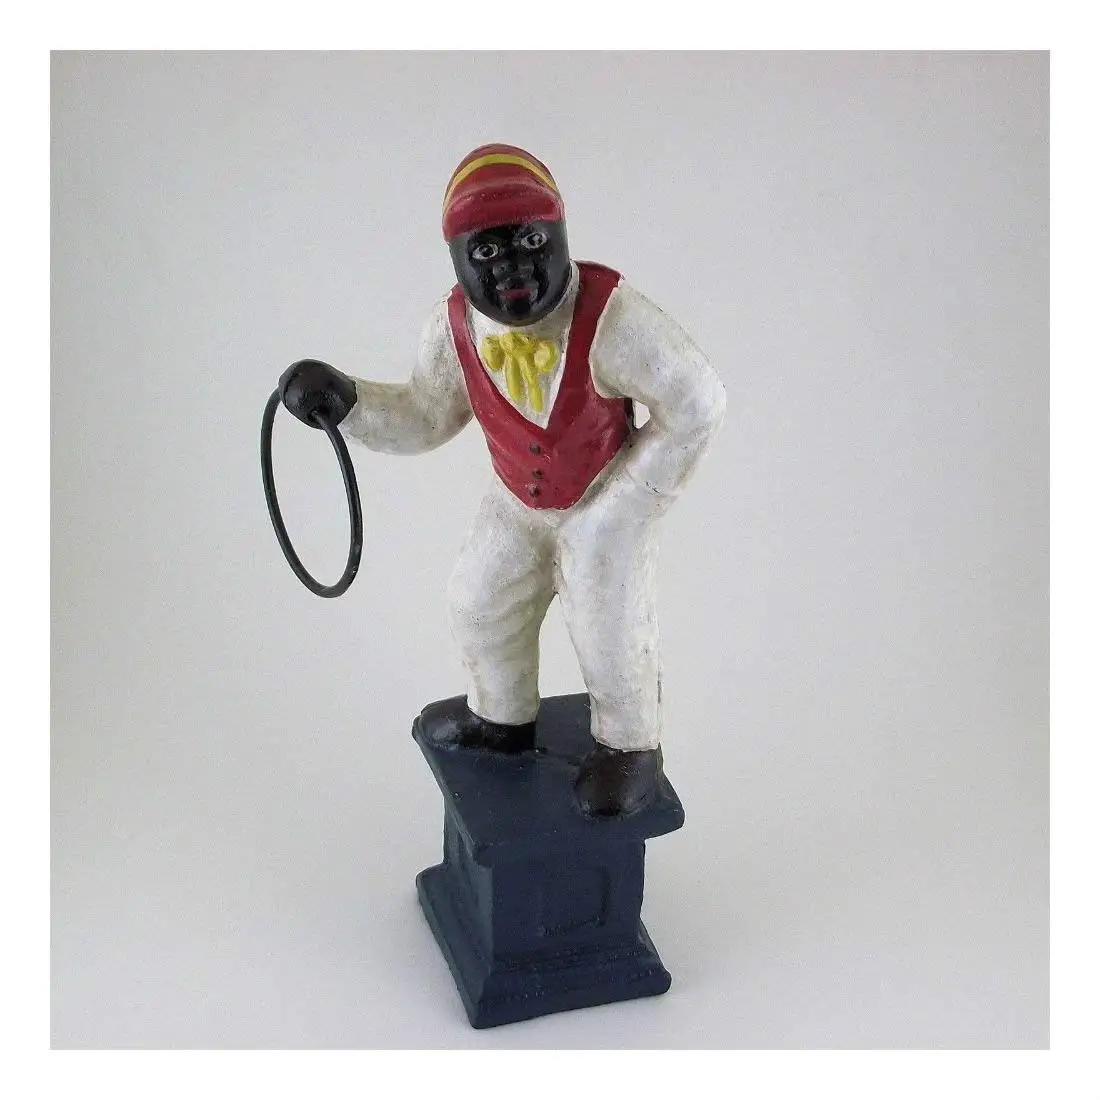 Cheap Lawn Jockey For Sale, find Lawn Jockey For Sale deals on line at